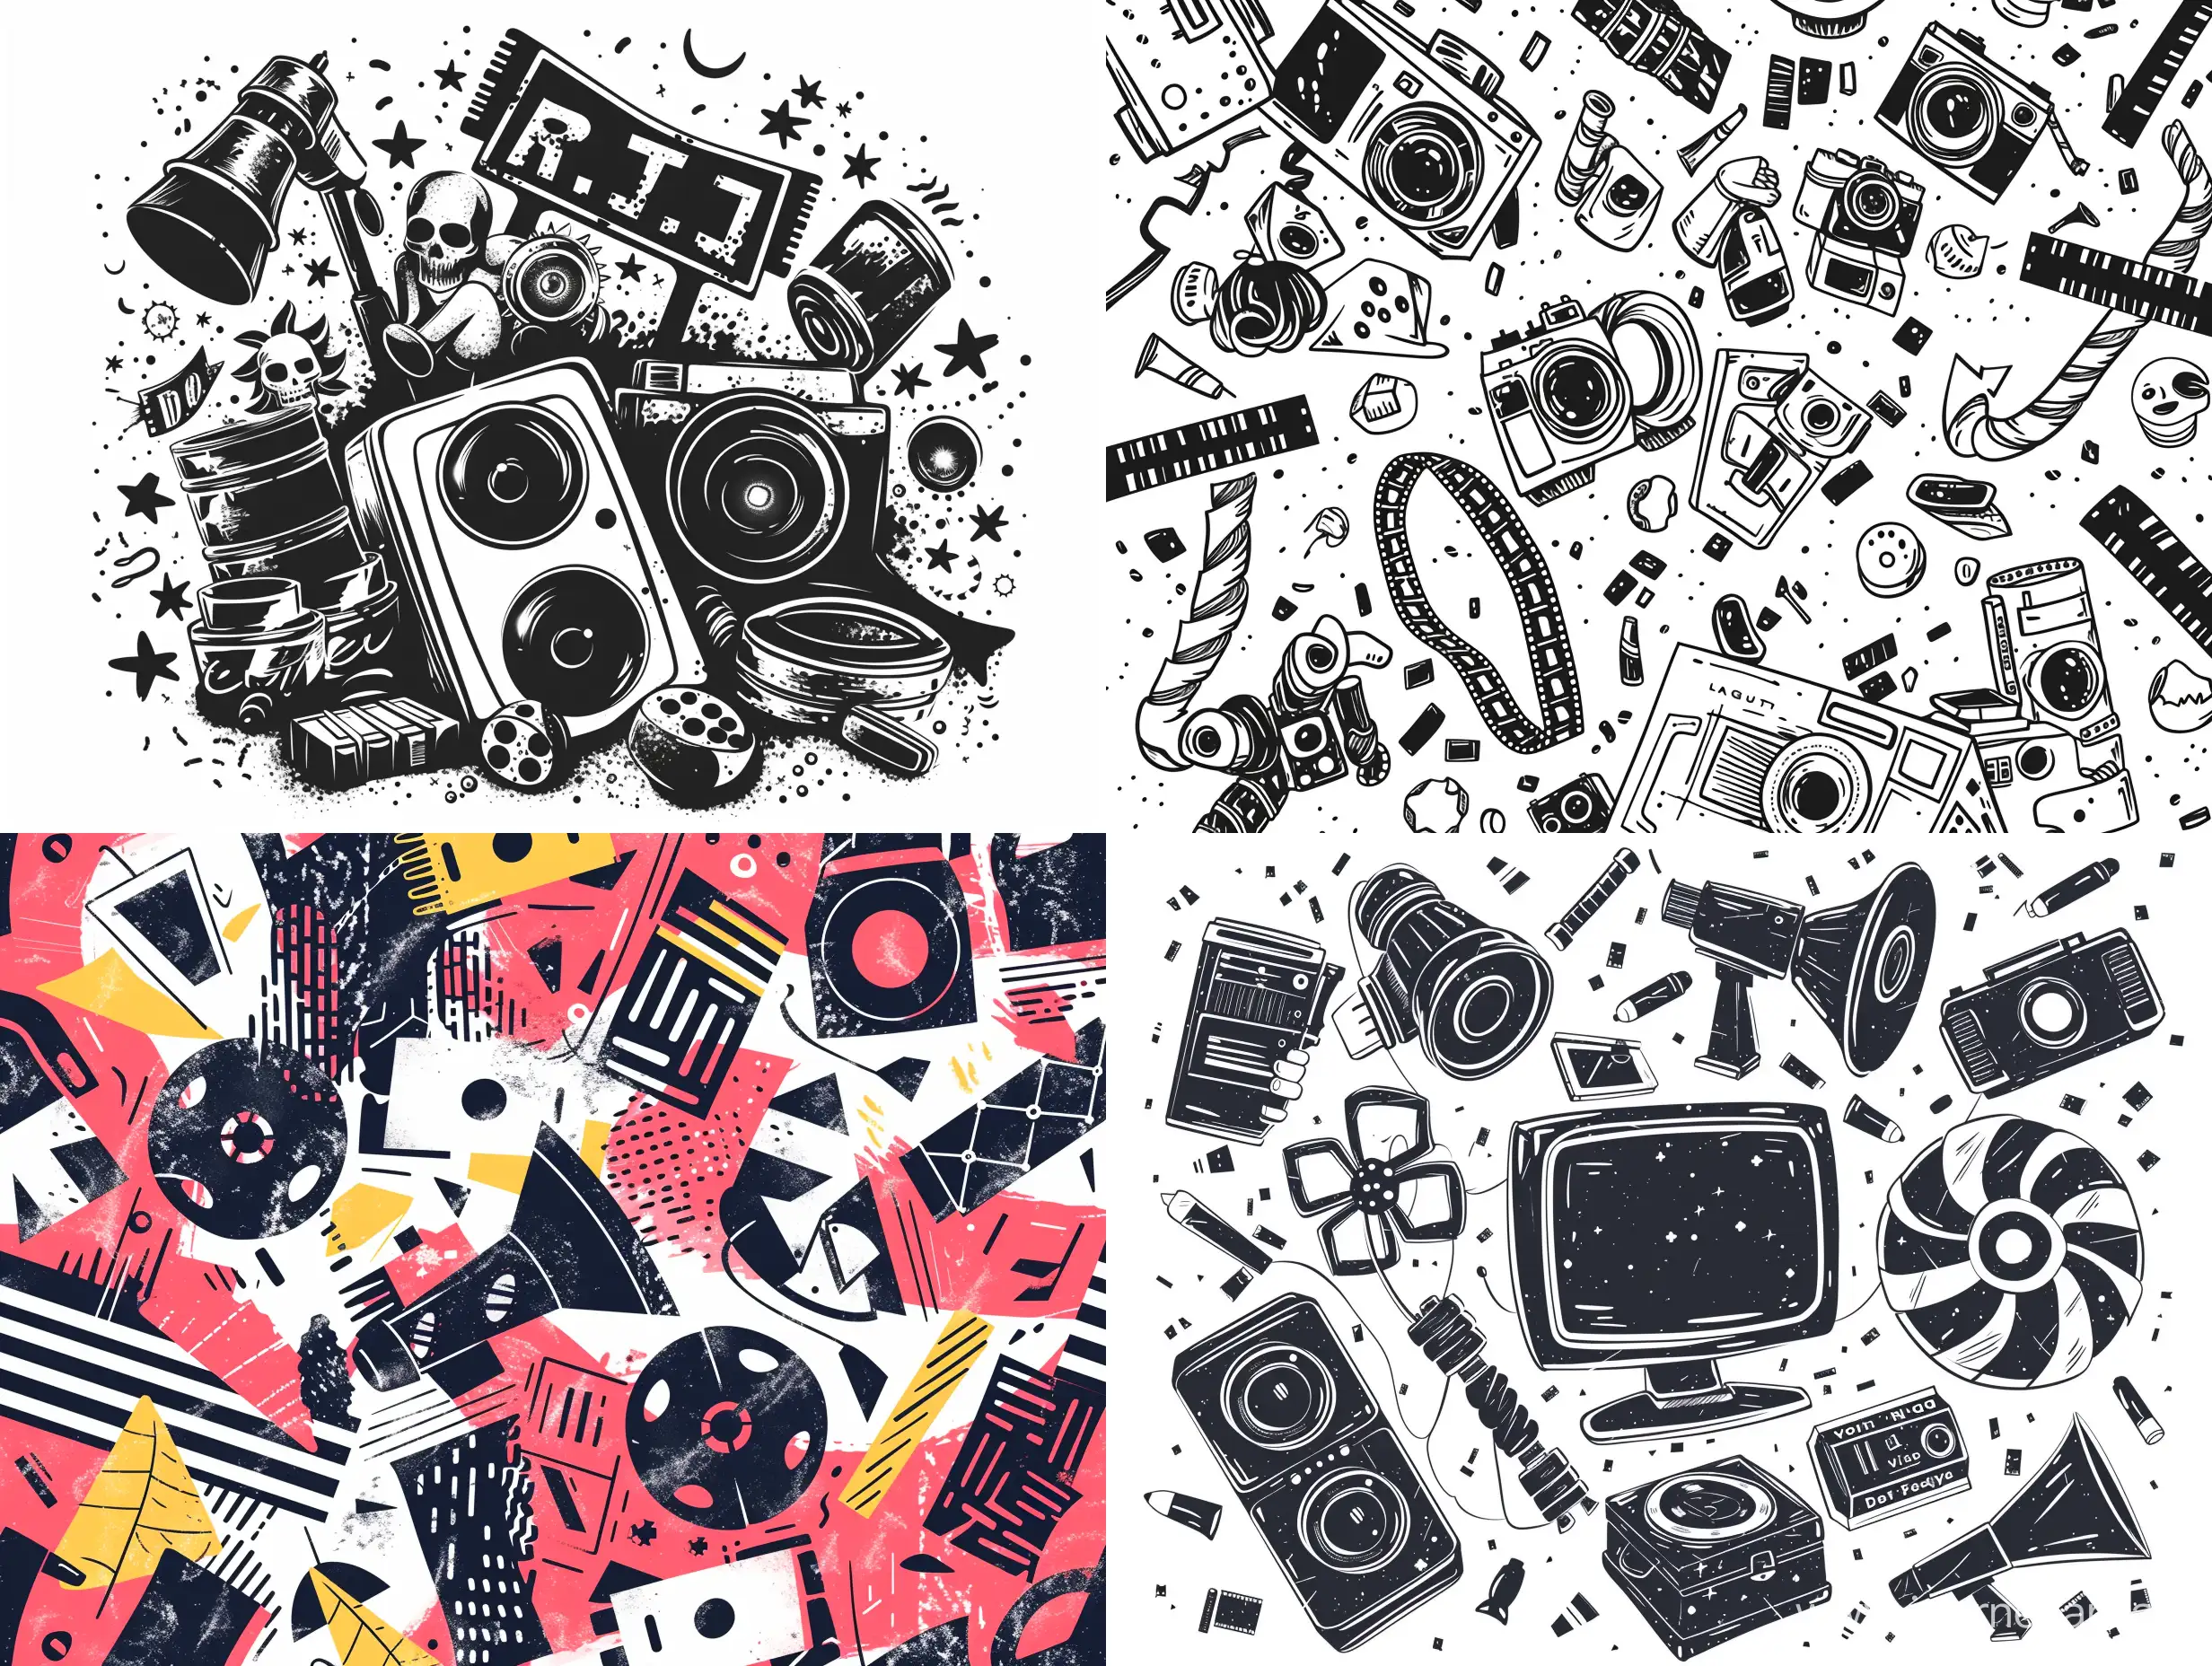 patterned ornament from the attributes of the film industry, stylized caricature, cartoon style,flat illustration, ink, Victor Ngai style